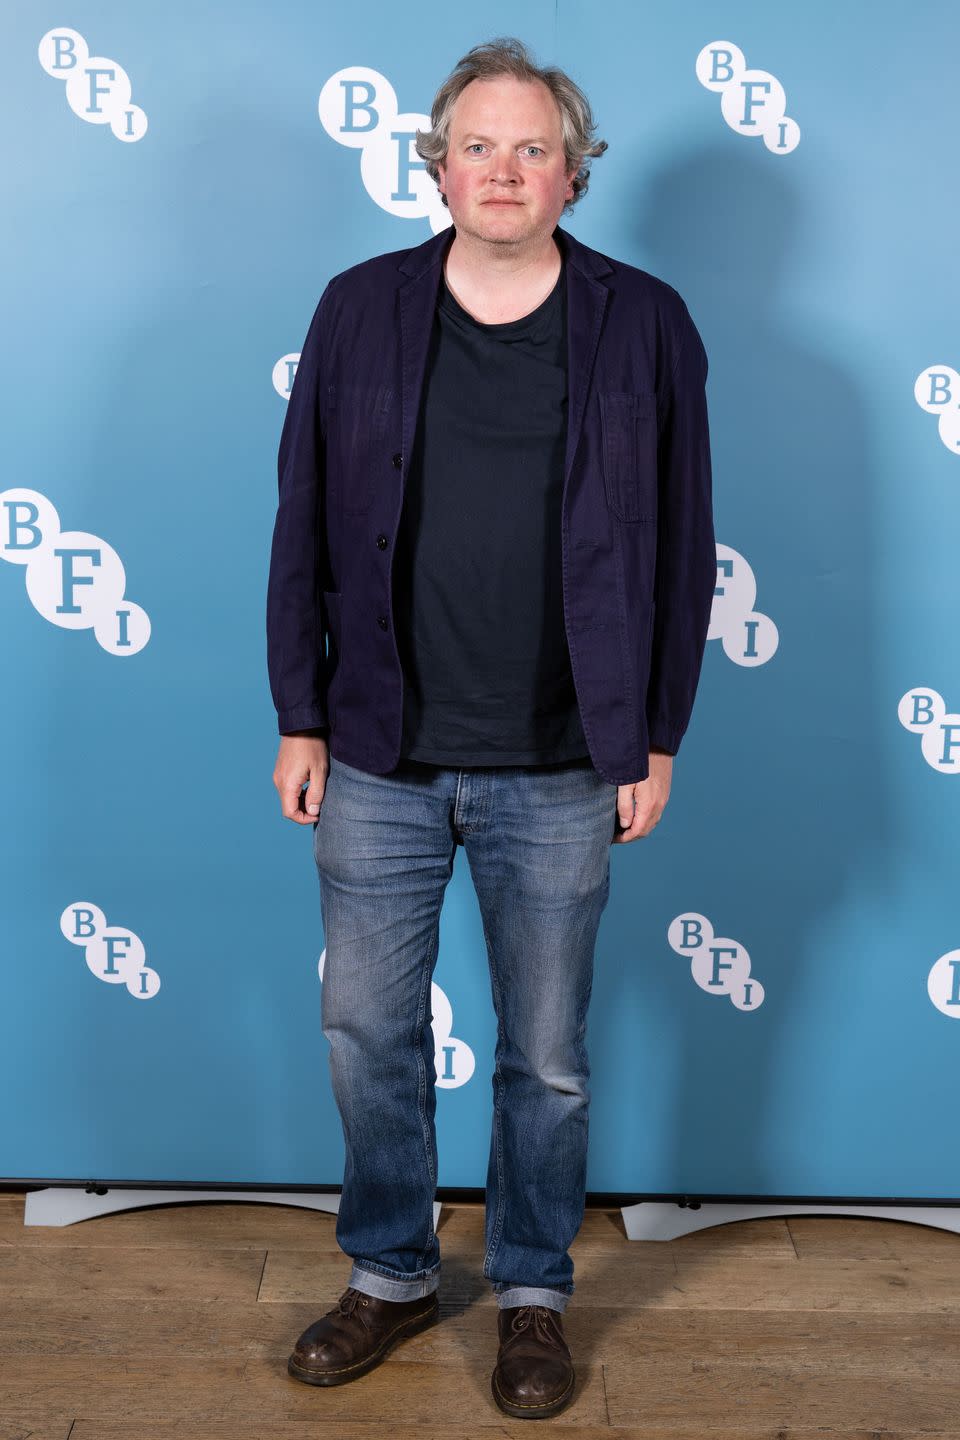 miles jupp wearing a black shirt and blazer with jeans, standing in front of a blue background with the bfi logo repeating over it